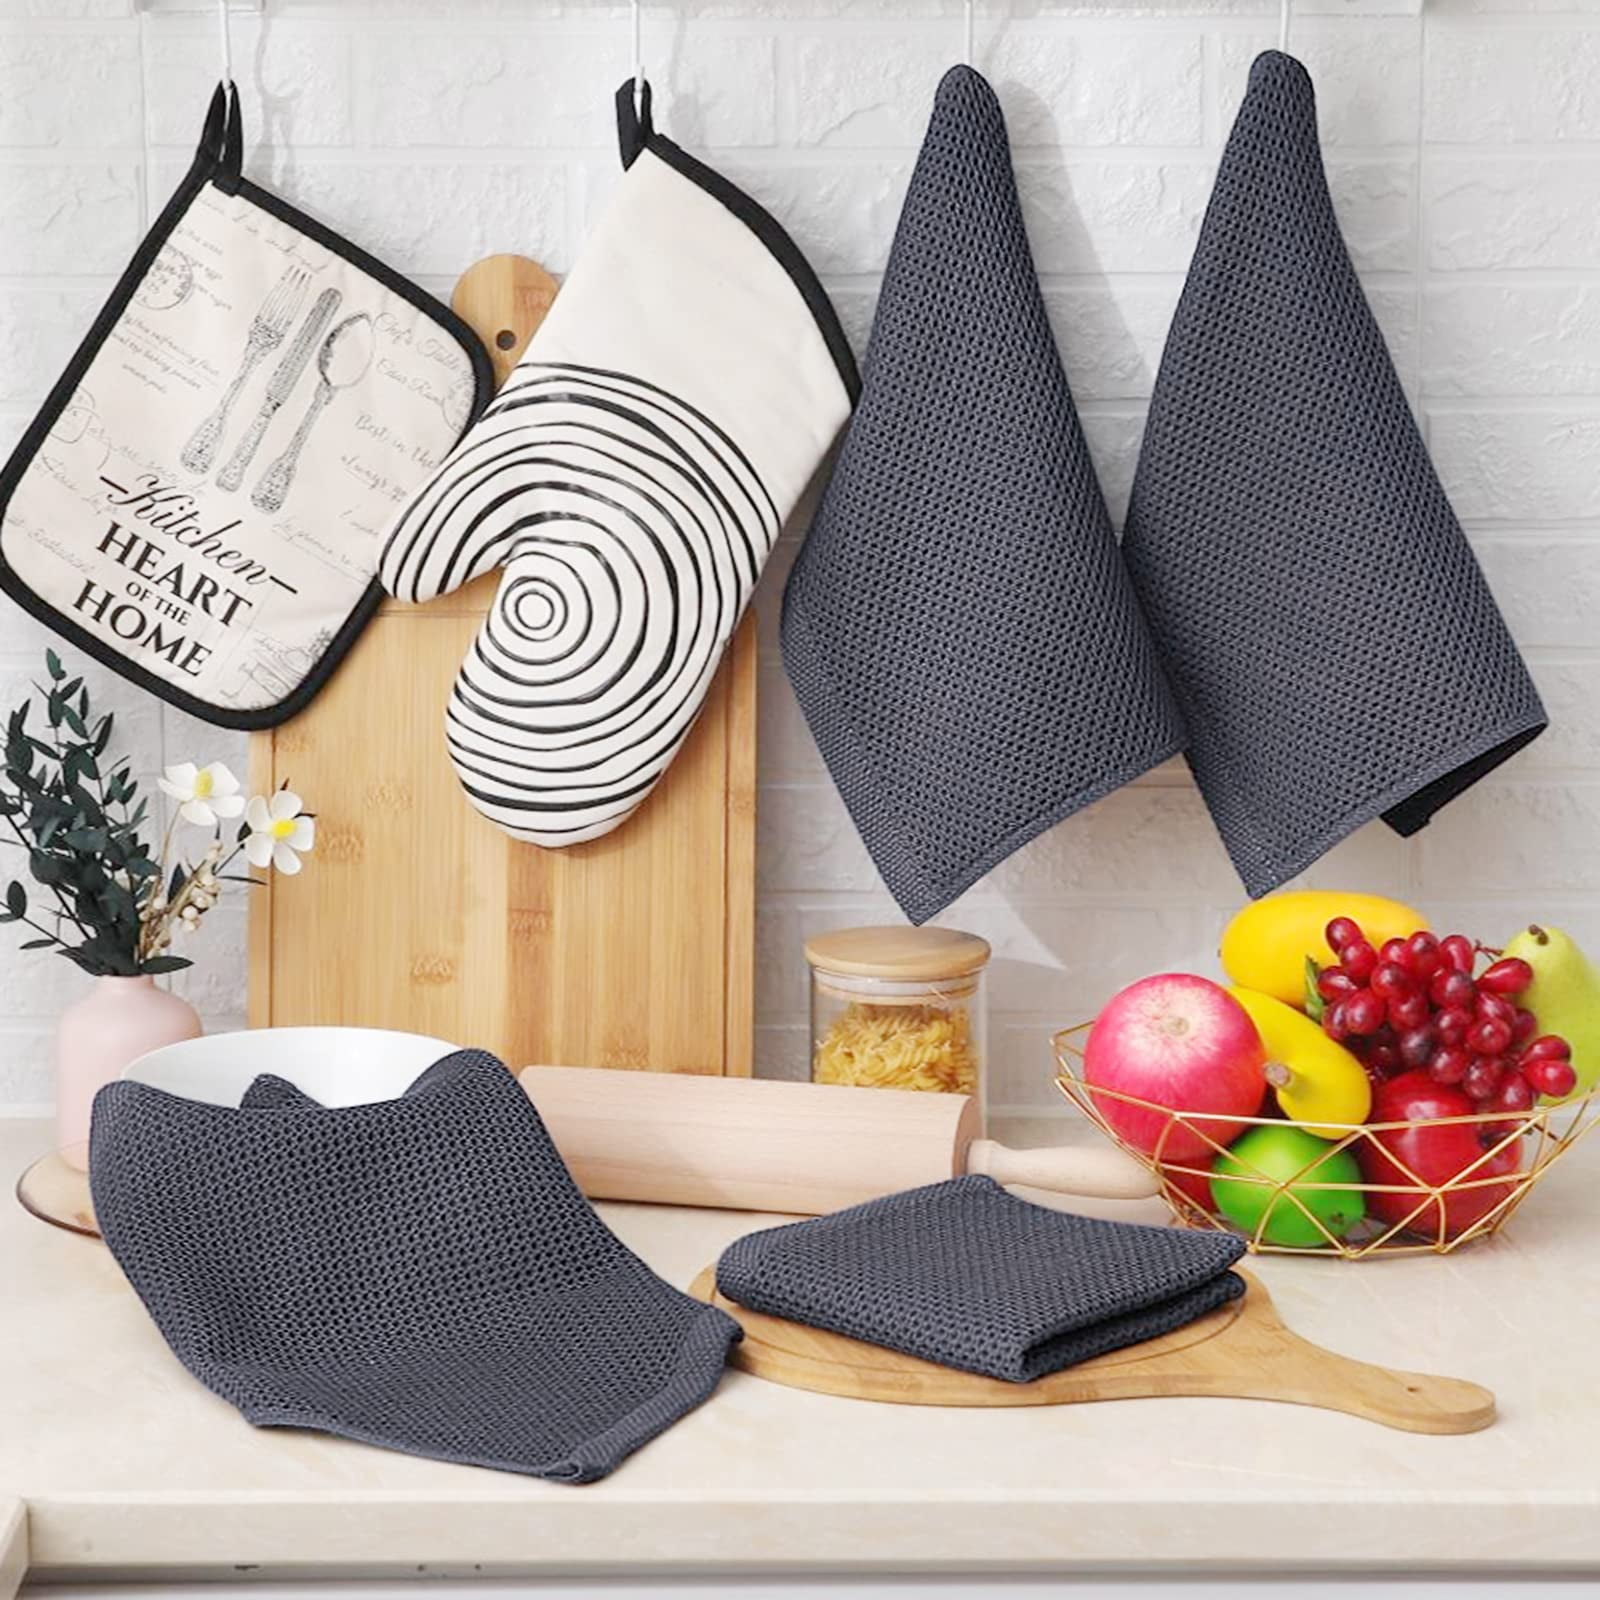 Kitinjoy 100% Cotton Kitchen Dish Cloths, 6-Pack Waffle Weave Dish Towels  for Drying Dishes Super Soft Absorbent Quick Drying Dish Rags, 12 X 12